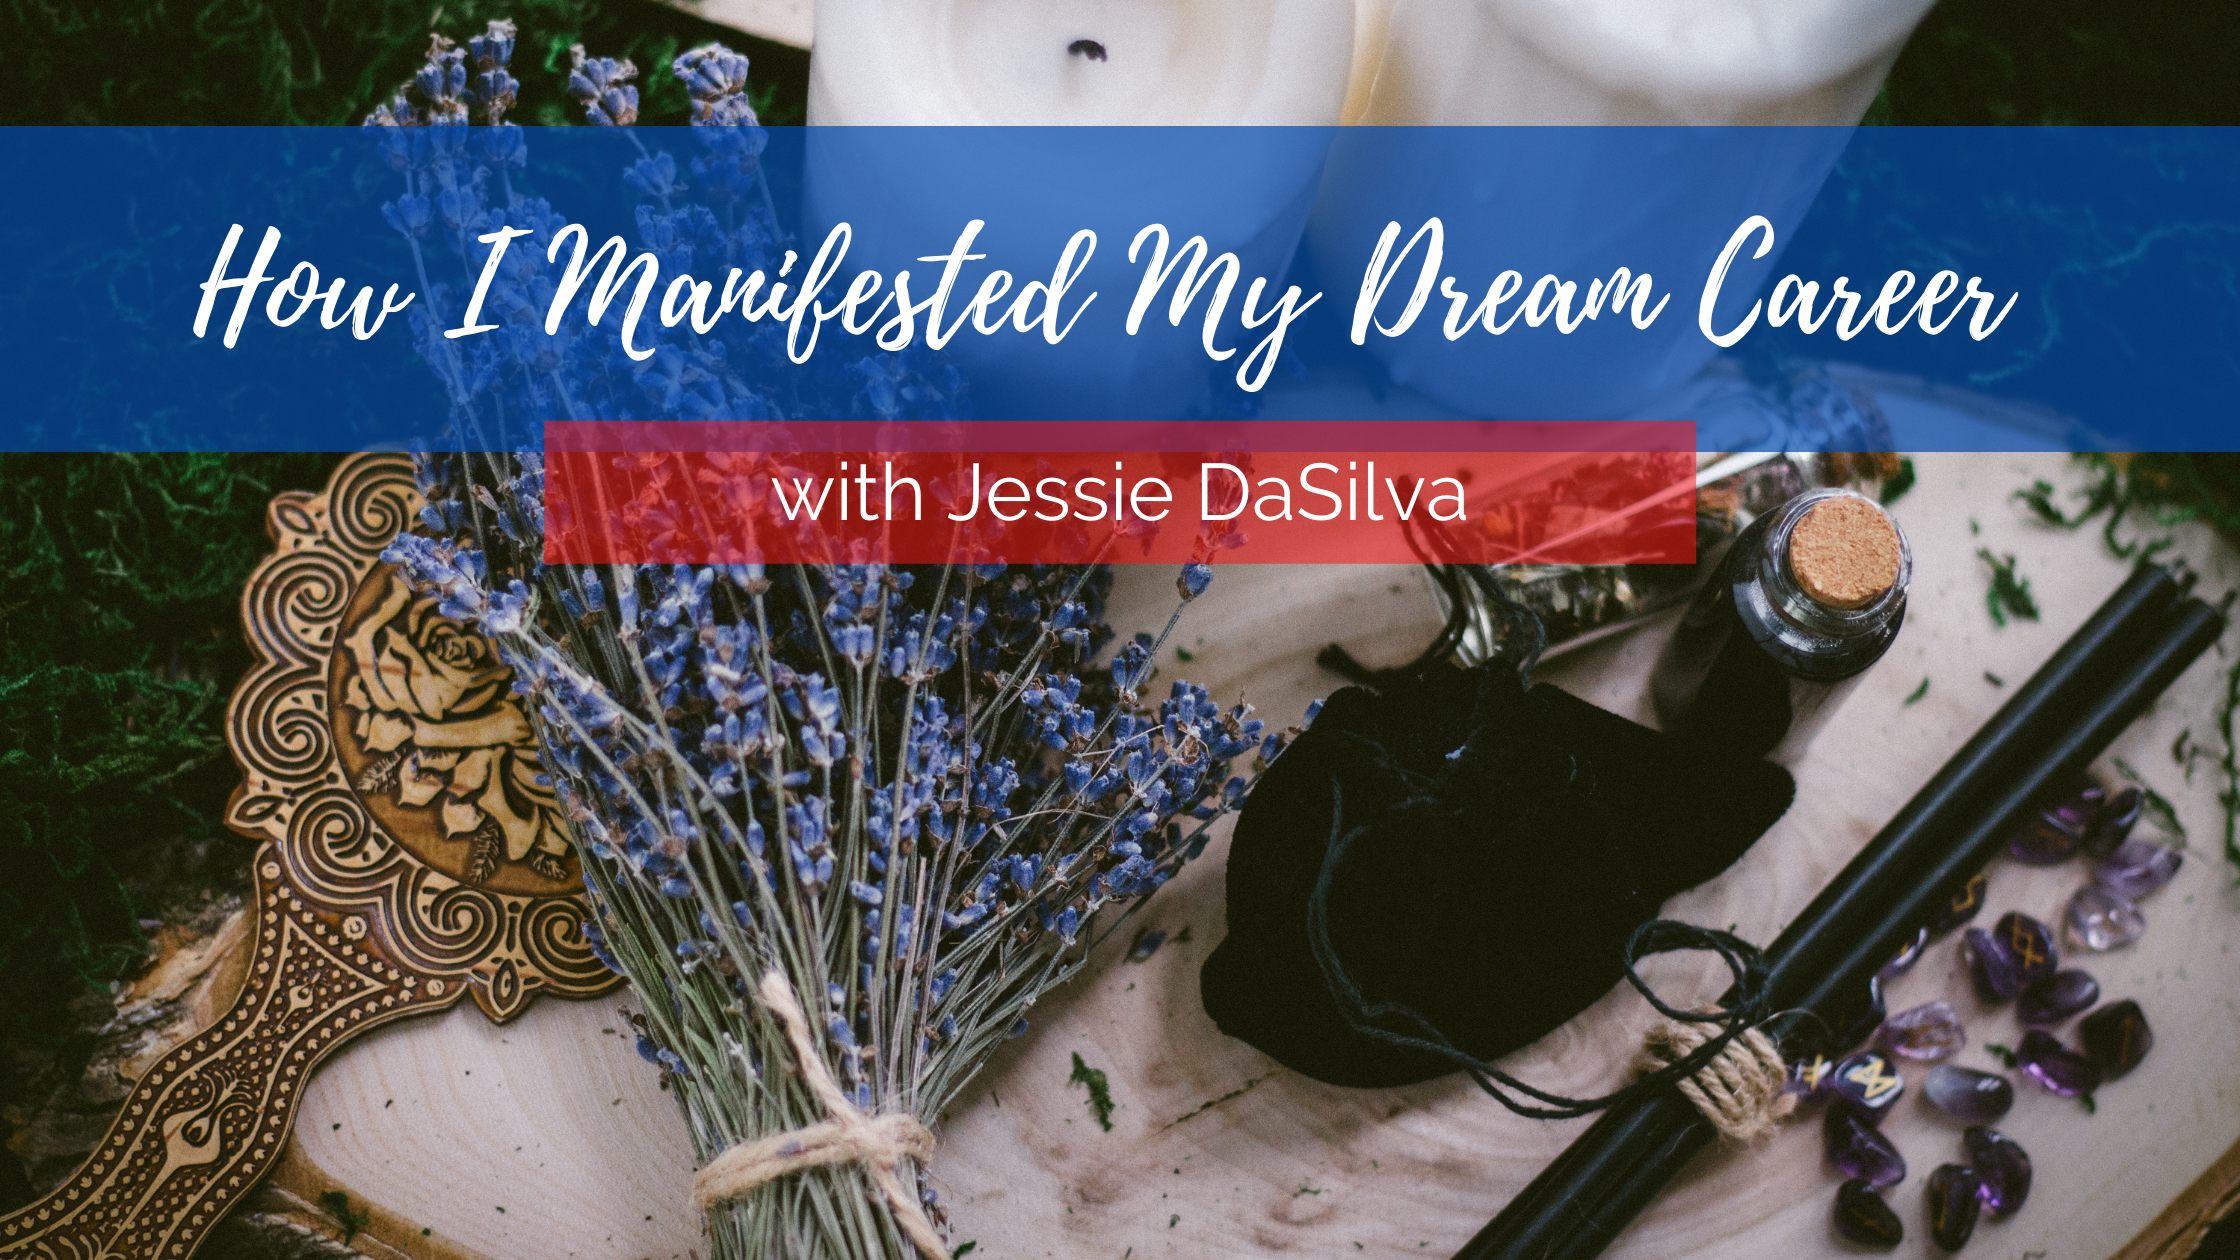 Picture of an altar with lavender and the words "how I manifested my dream career" with Jessie DaSilva written over the picture